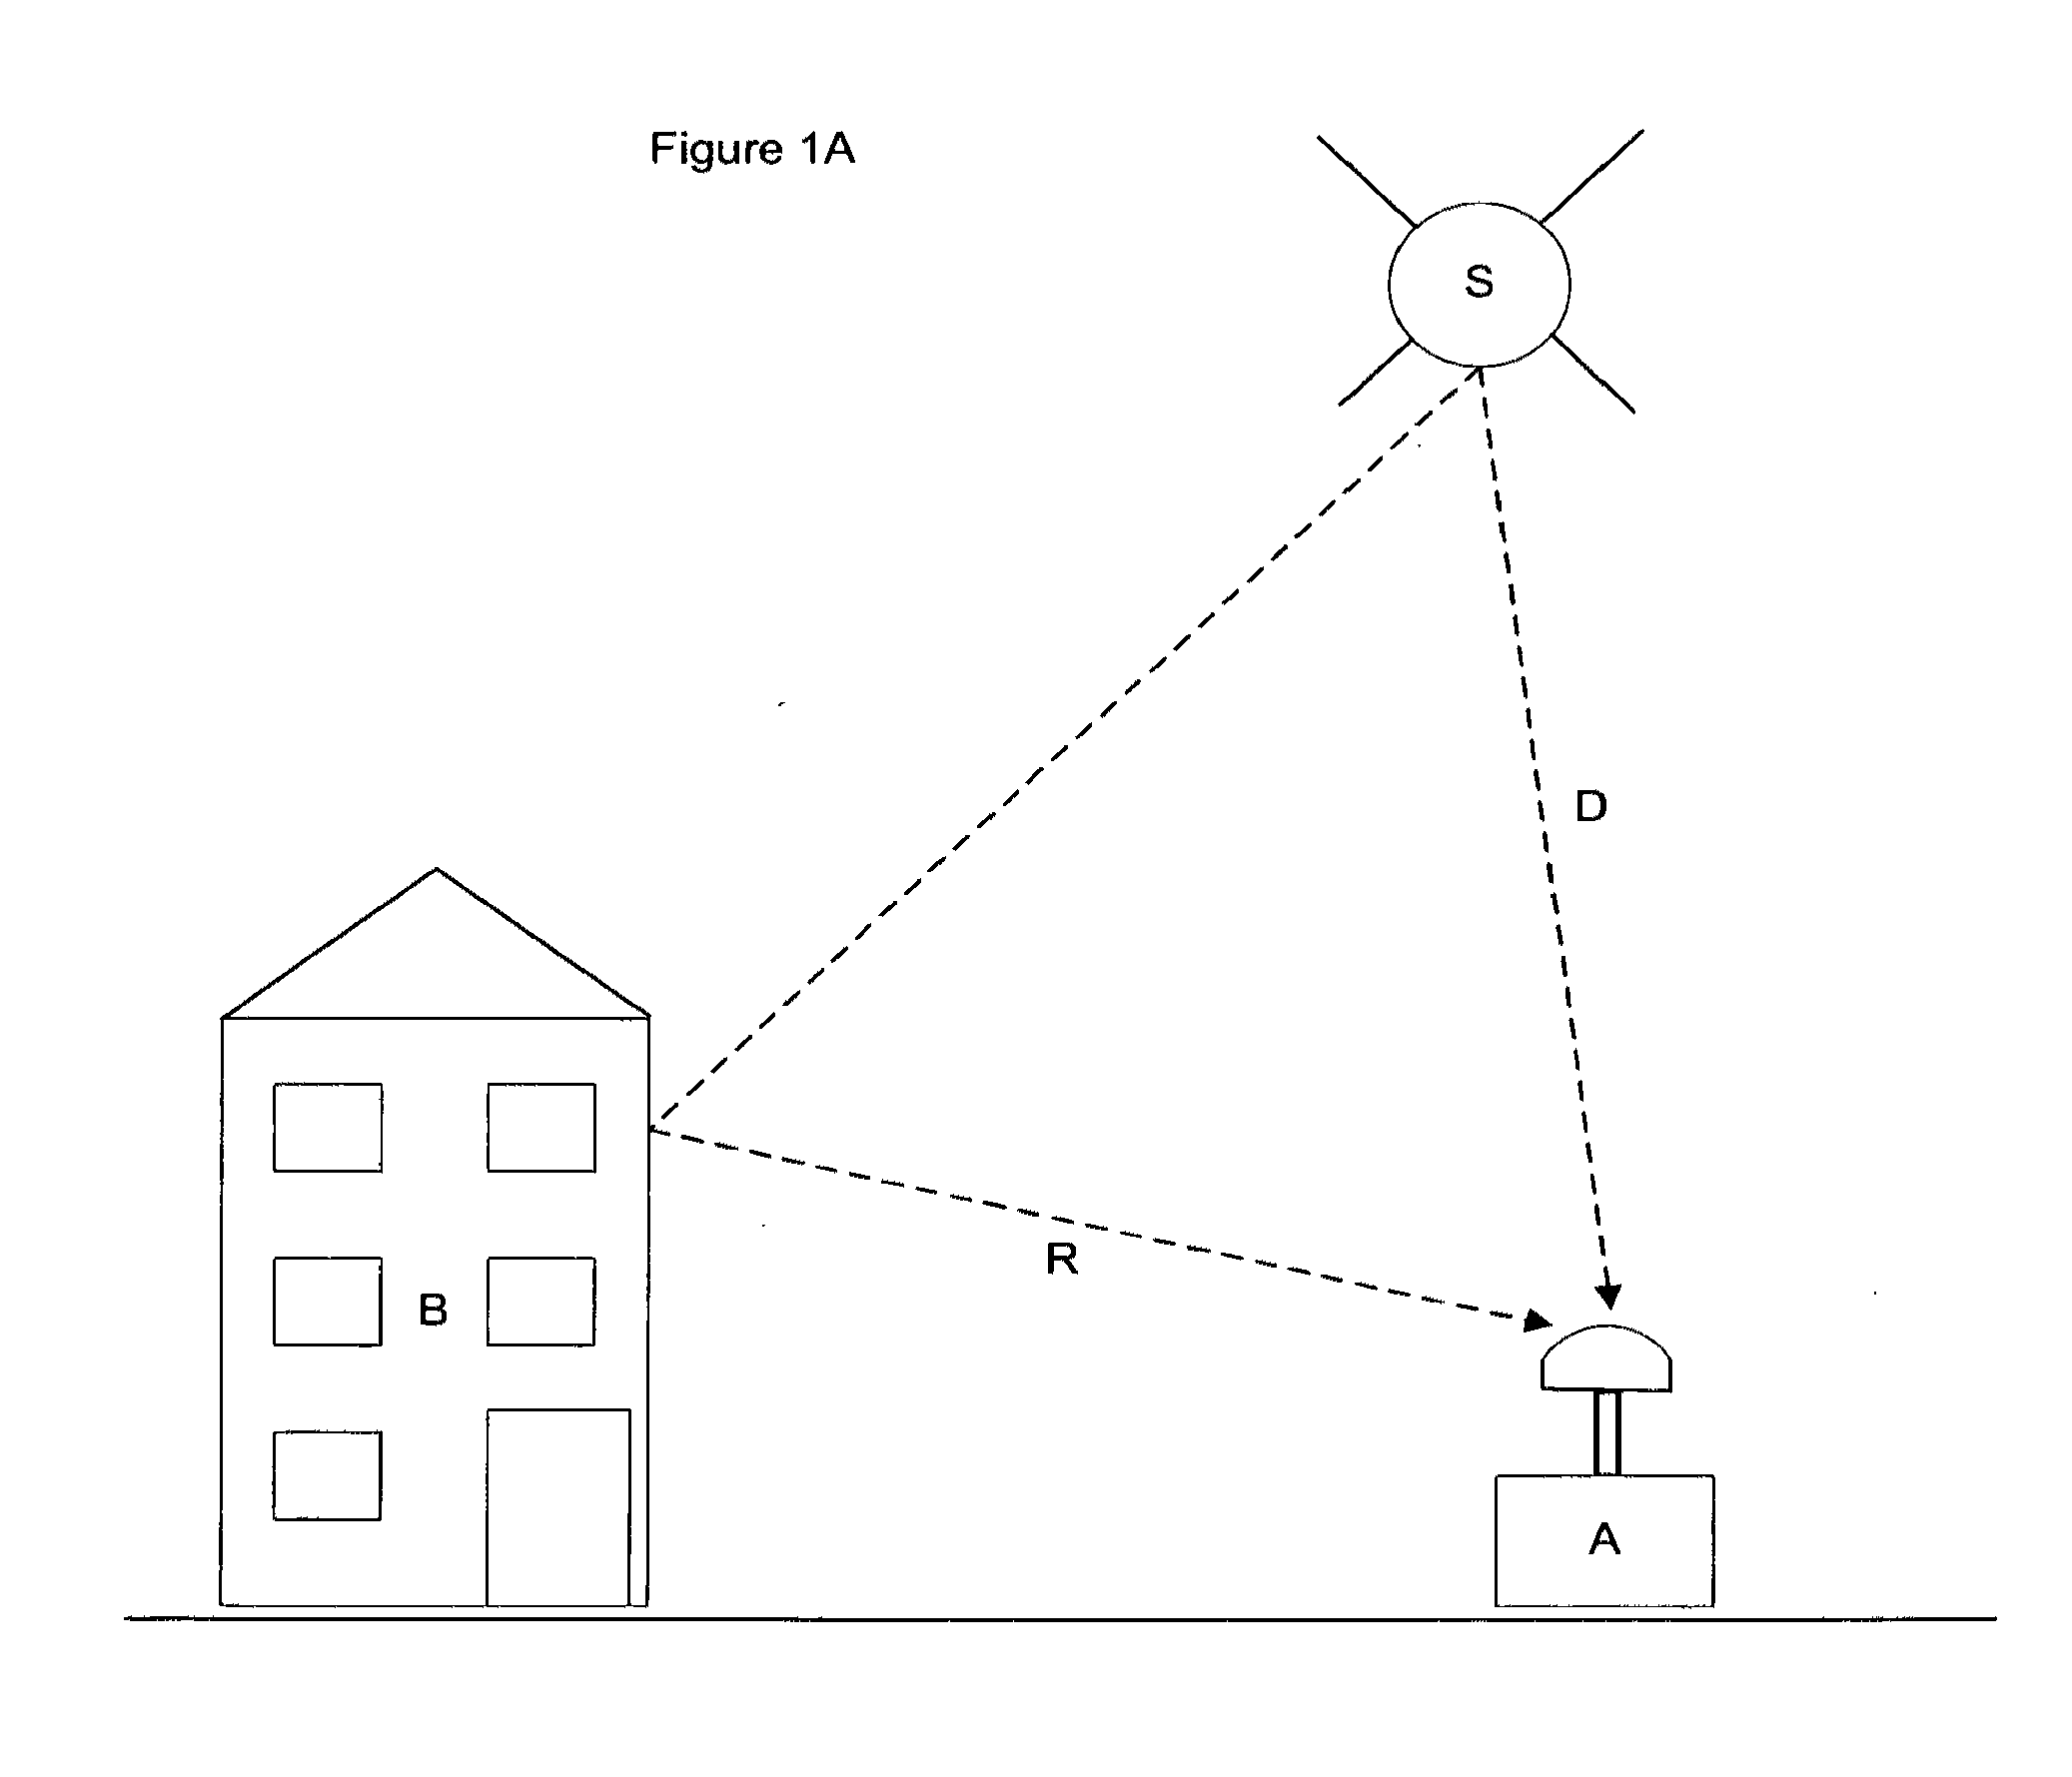 Global navigation satellite antenna systems and methods